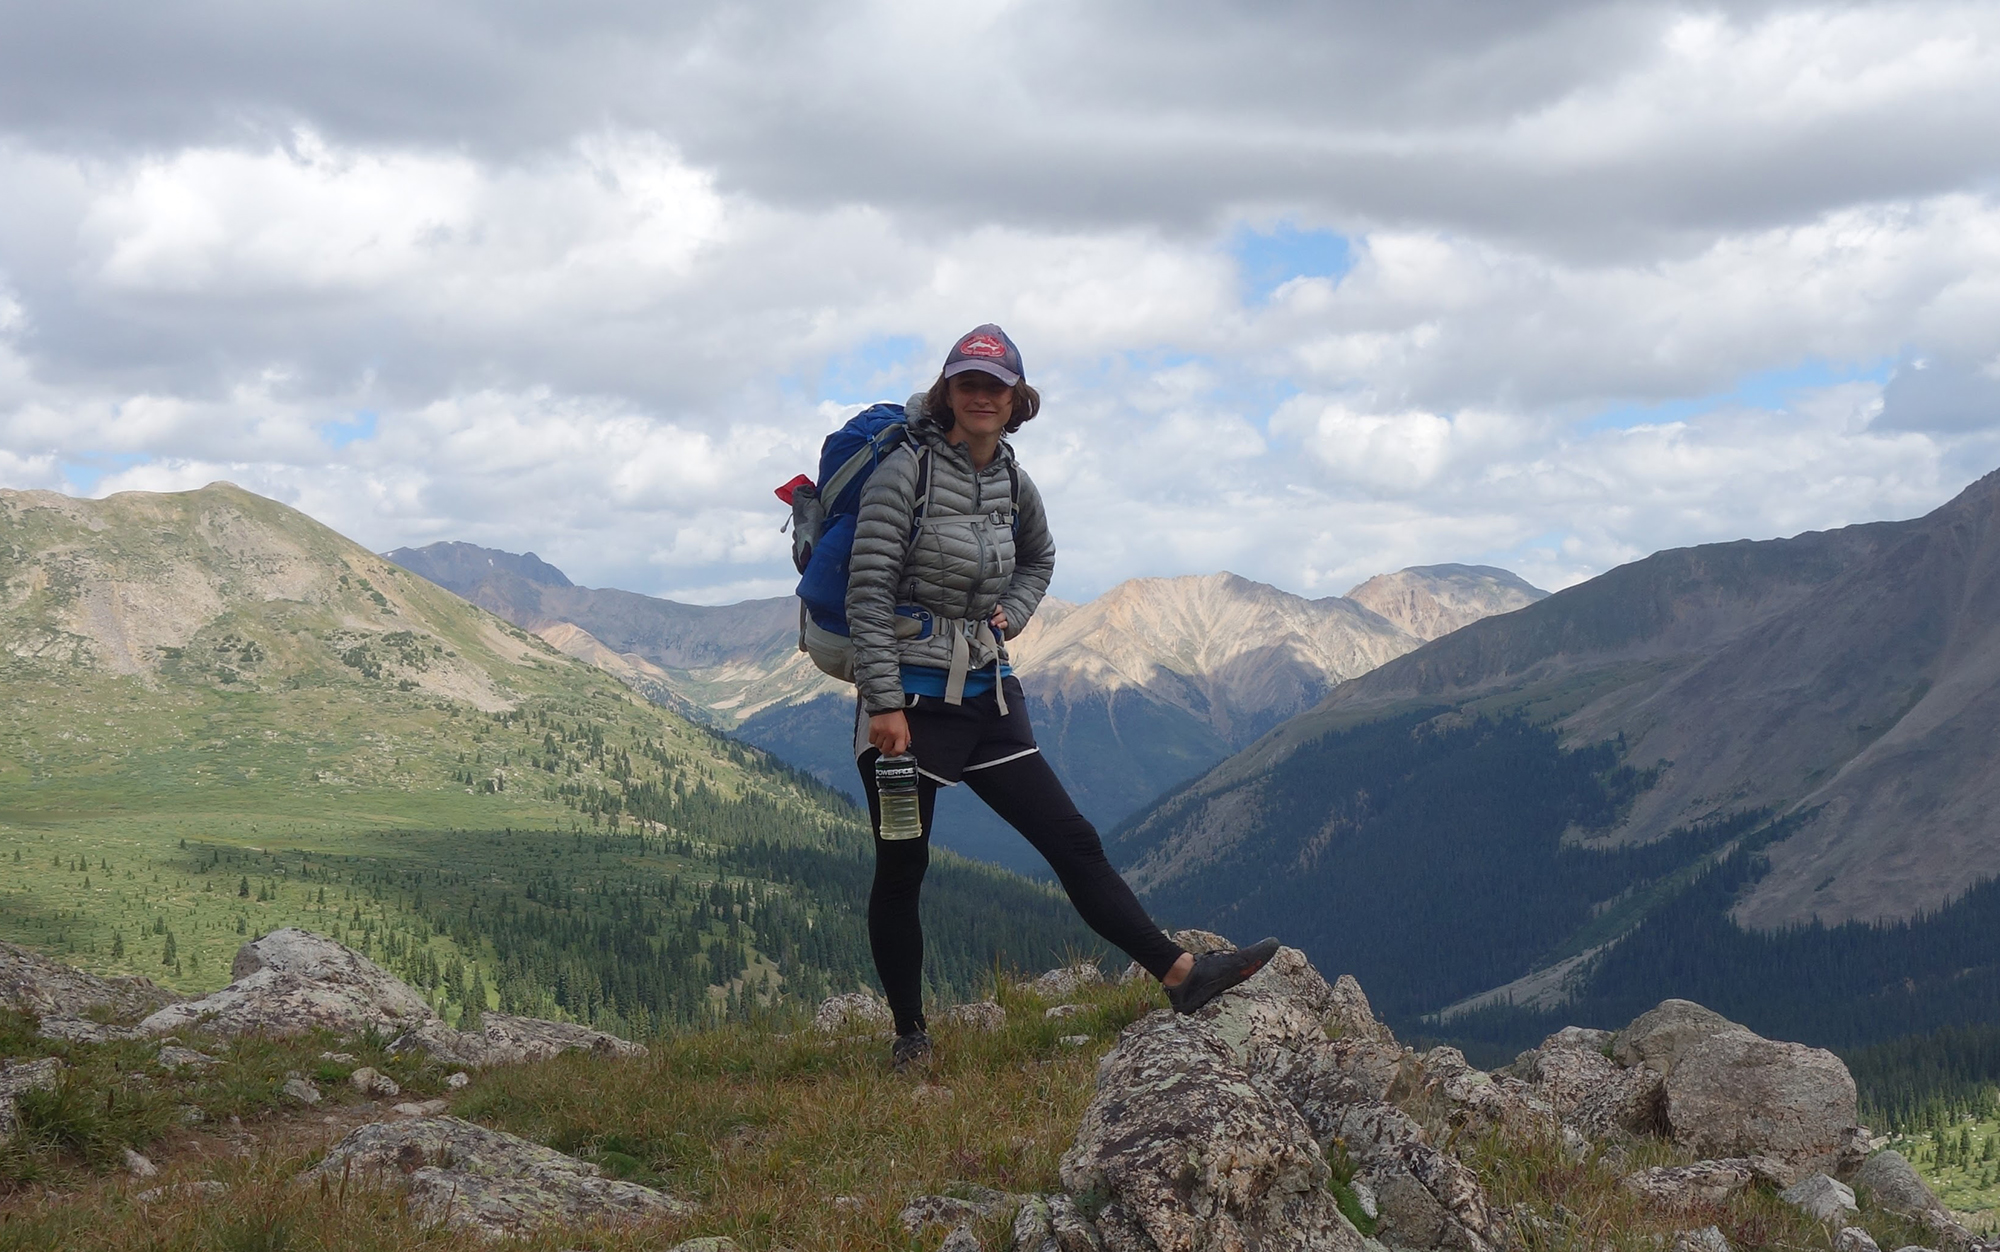 The Vivobarefoot Primus FGs ended up being the perfect shoe for my thru-hike of the 450-mile Colorado Trail.